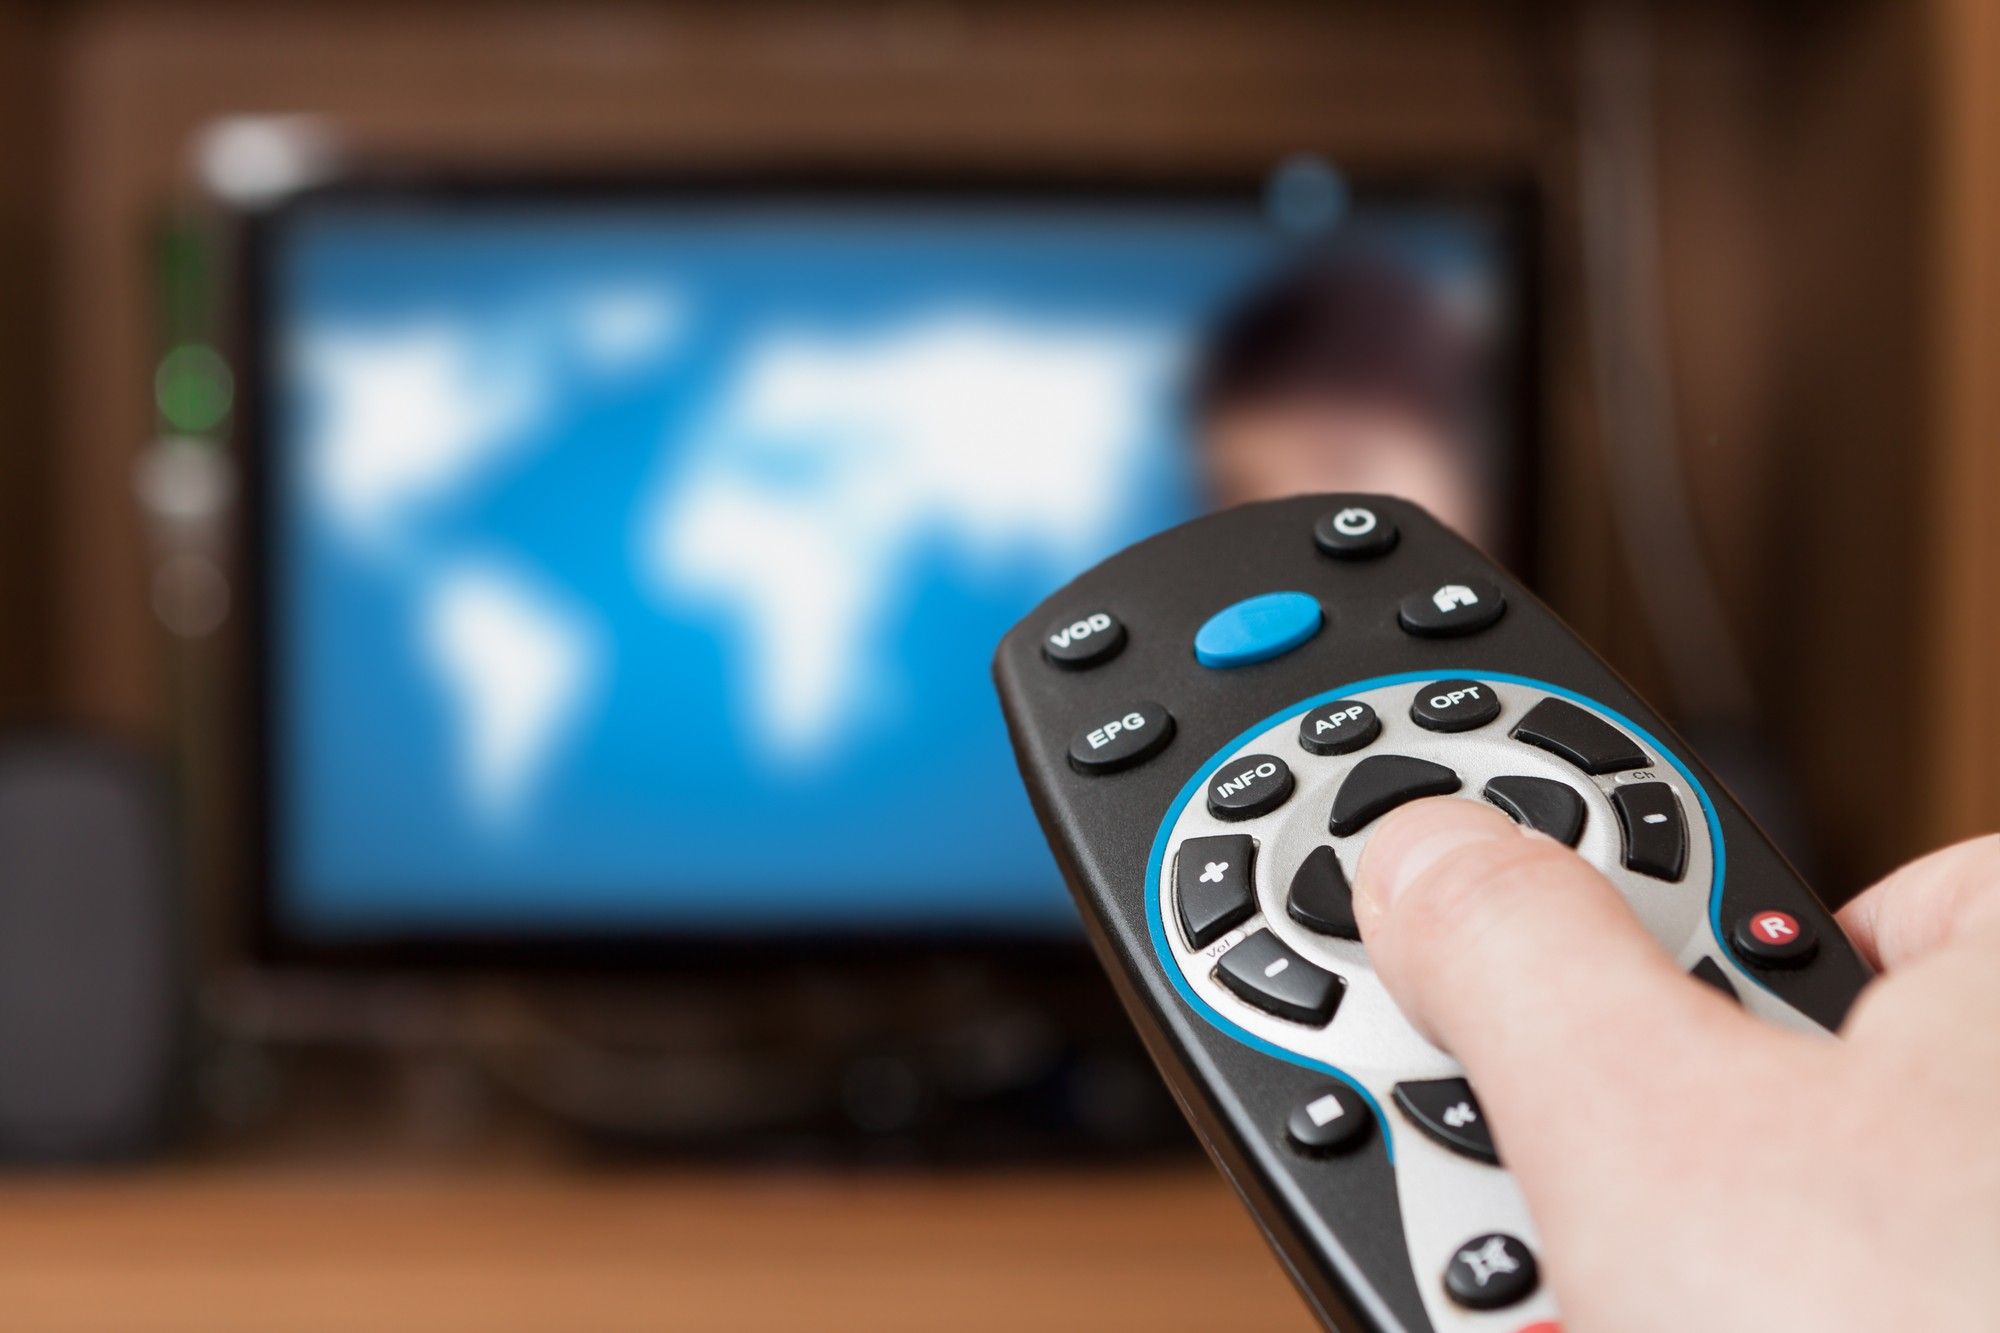 Charter cable TV users are allegedly duped into paying increasingly high prices for service.